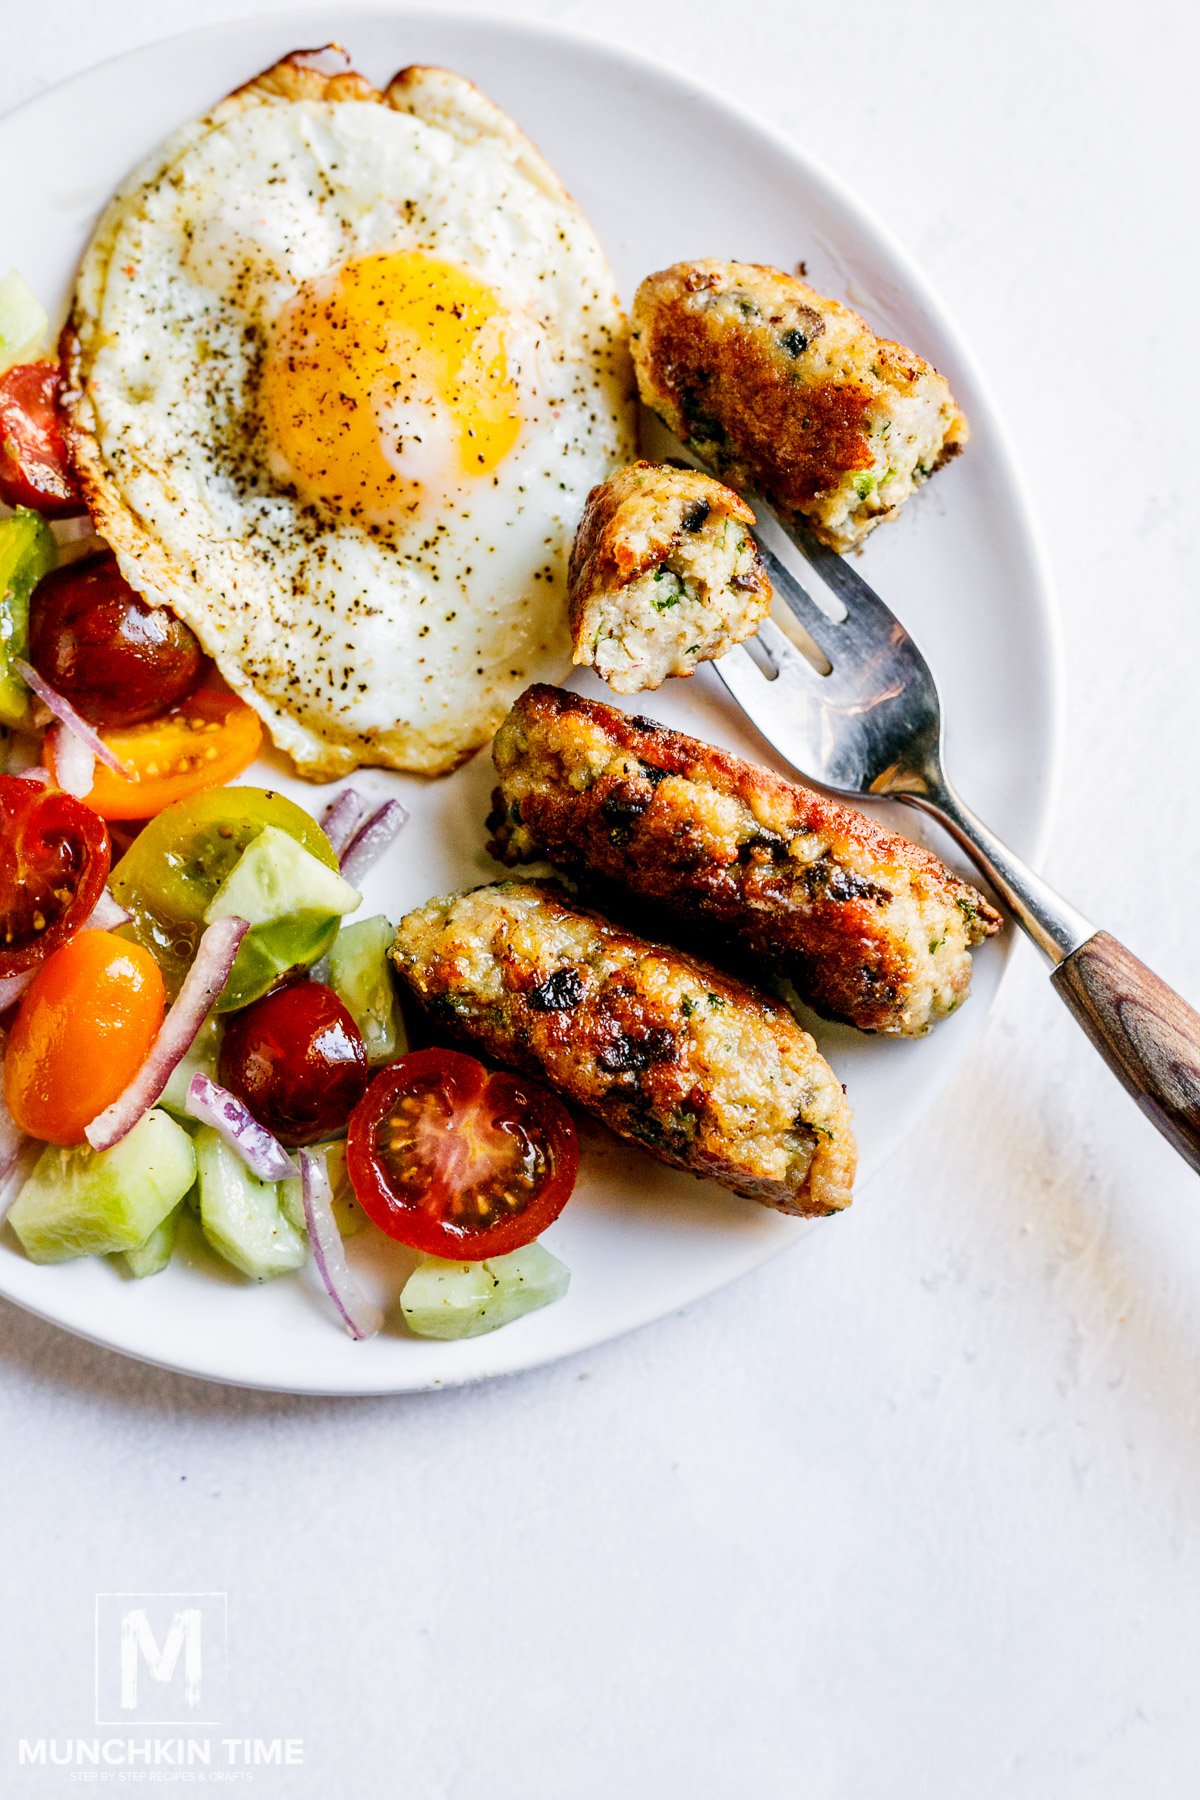 Chicken and mushroom sausages on a plate with salad and egg.